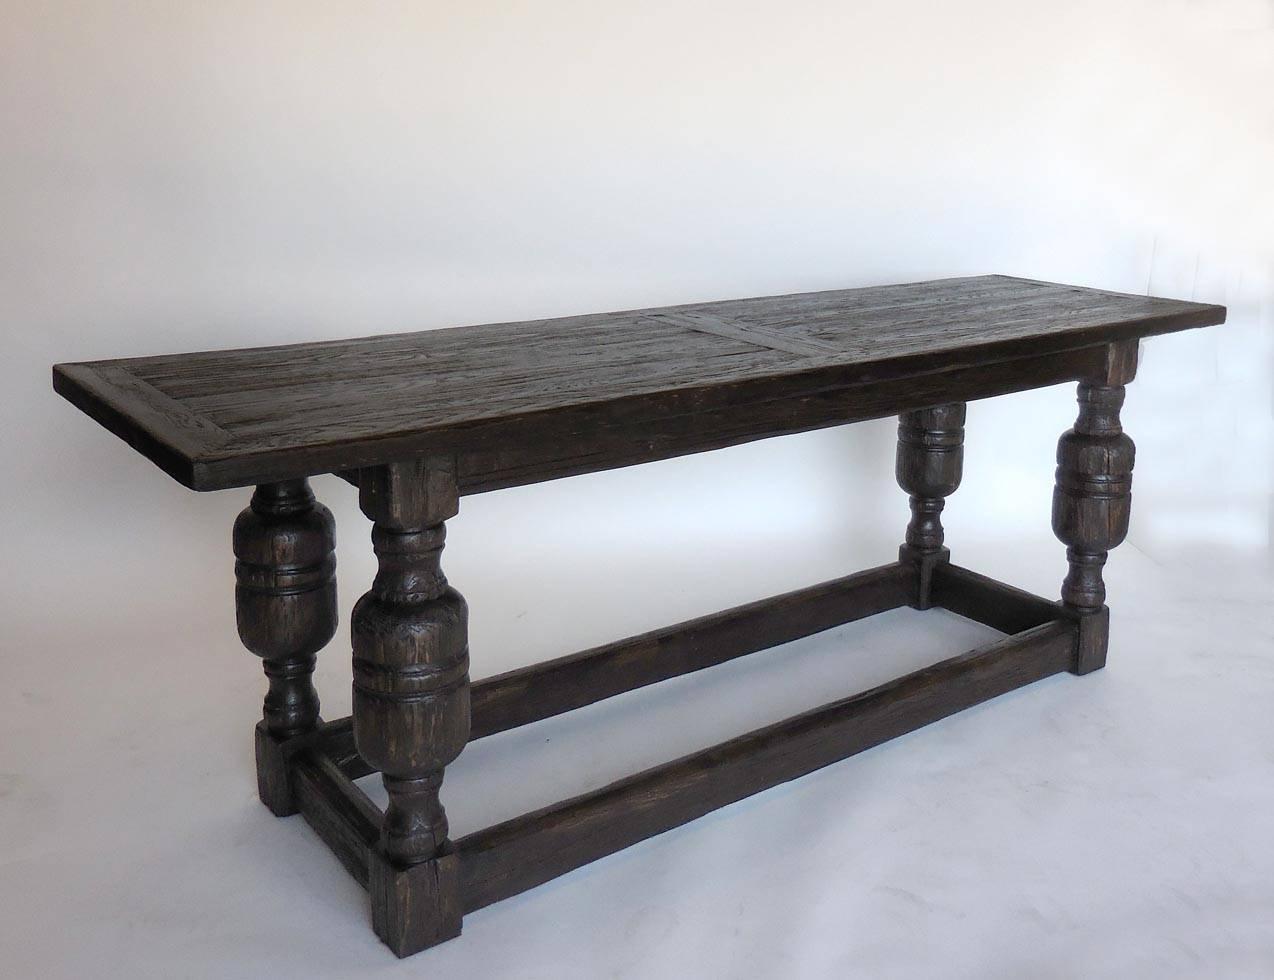 Handsome large-scale oak Baroque console. Framed tabletop and large-scale Baroque legs with four low stretchers add to the strong look. Heavily distressed oak with dark brown finish and some wood showing through for a naturally worn look. This one